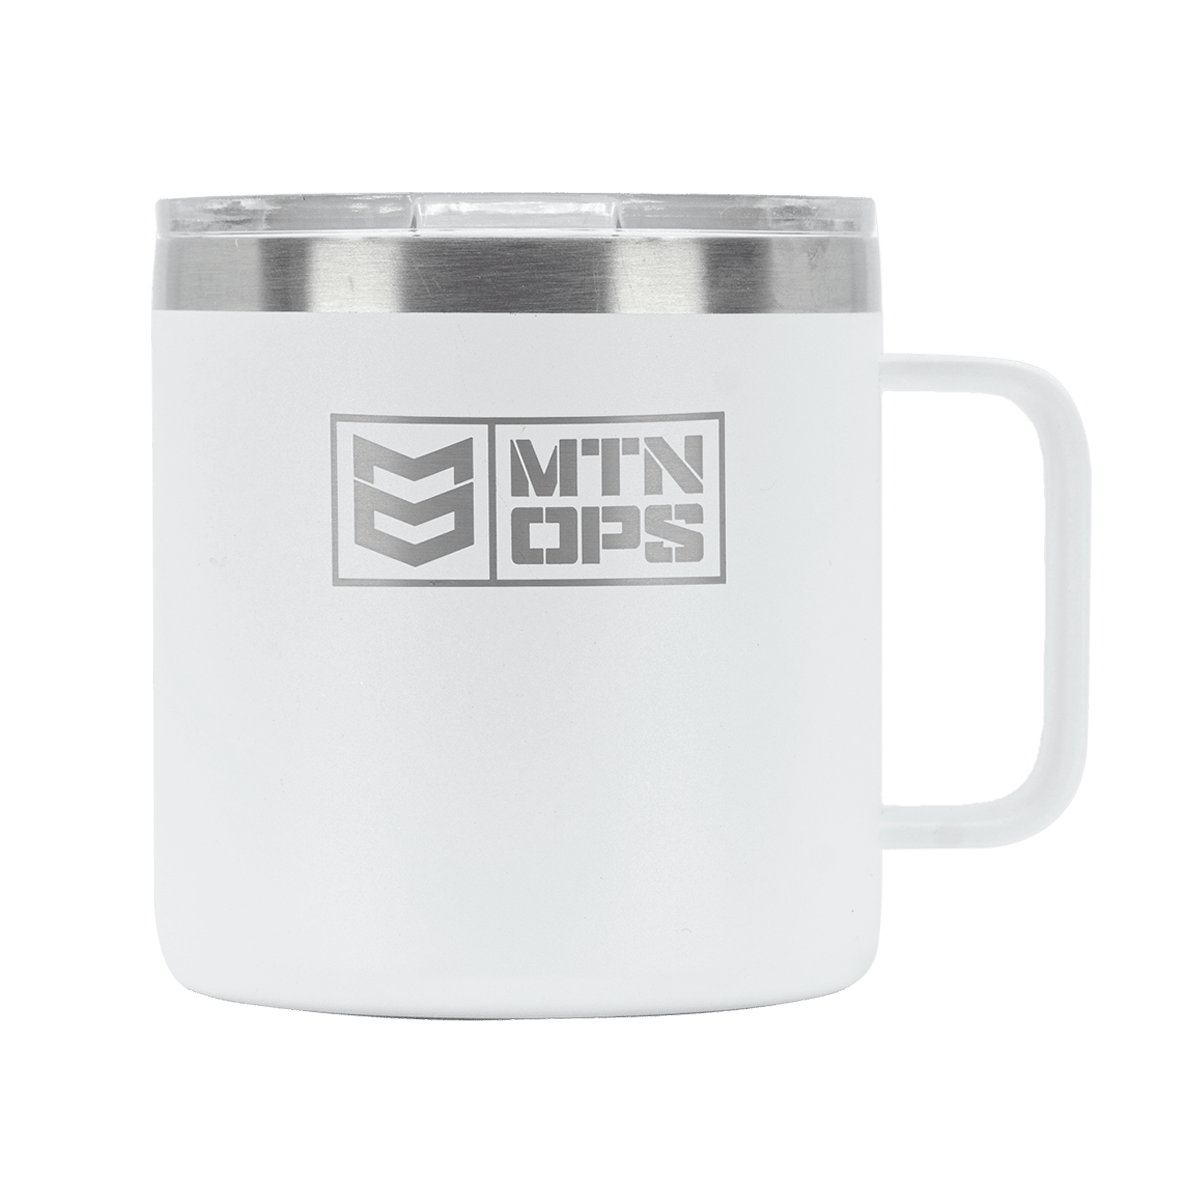 Yeti is offering 20% off 14-ounce Rambler mug and free drinkware